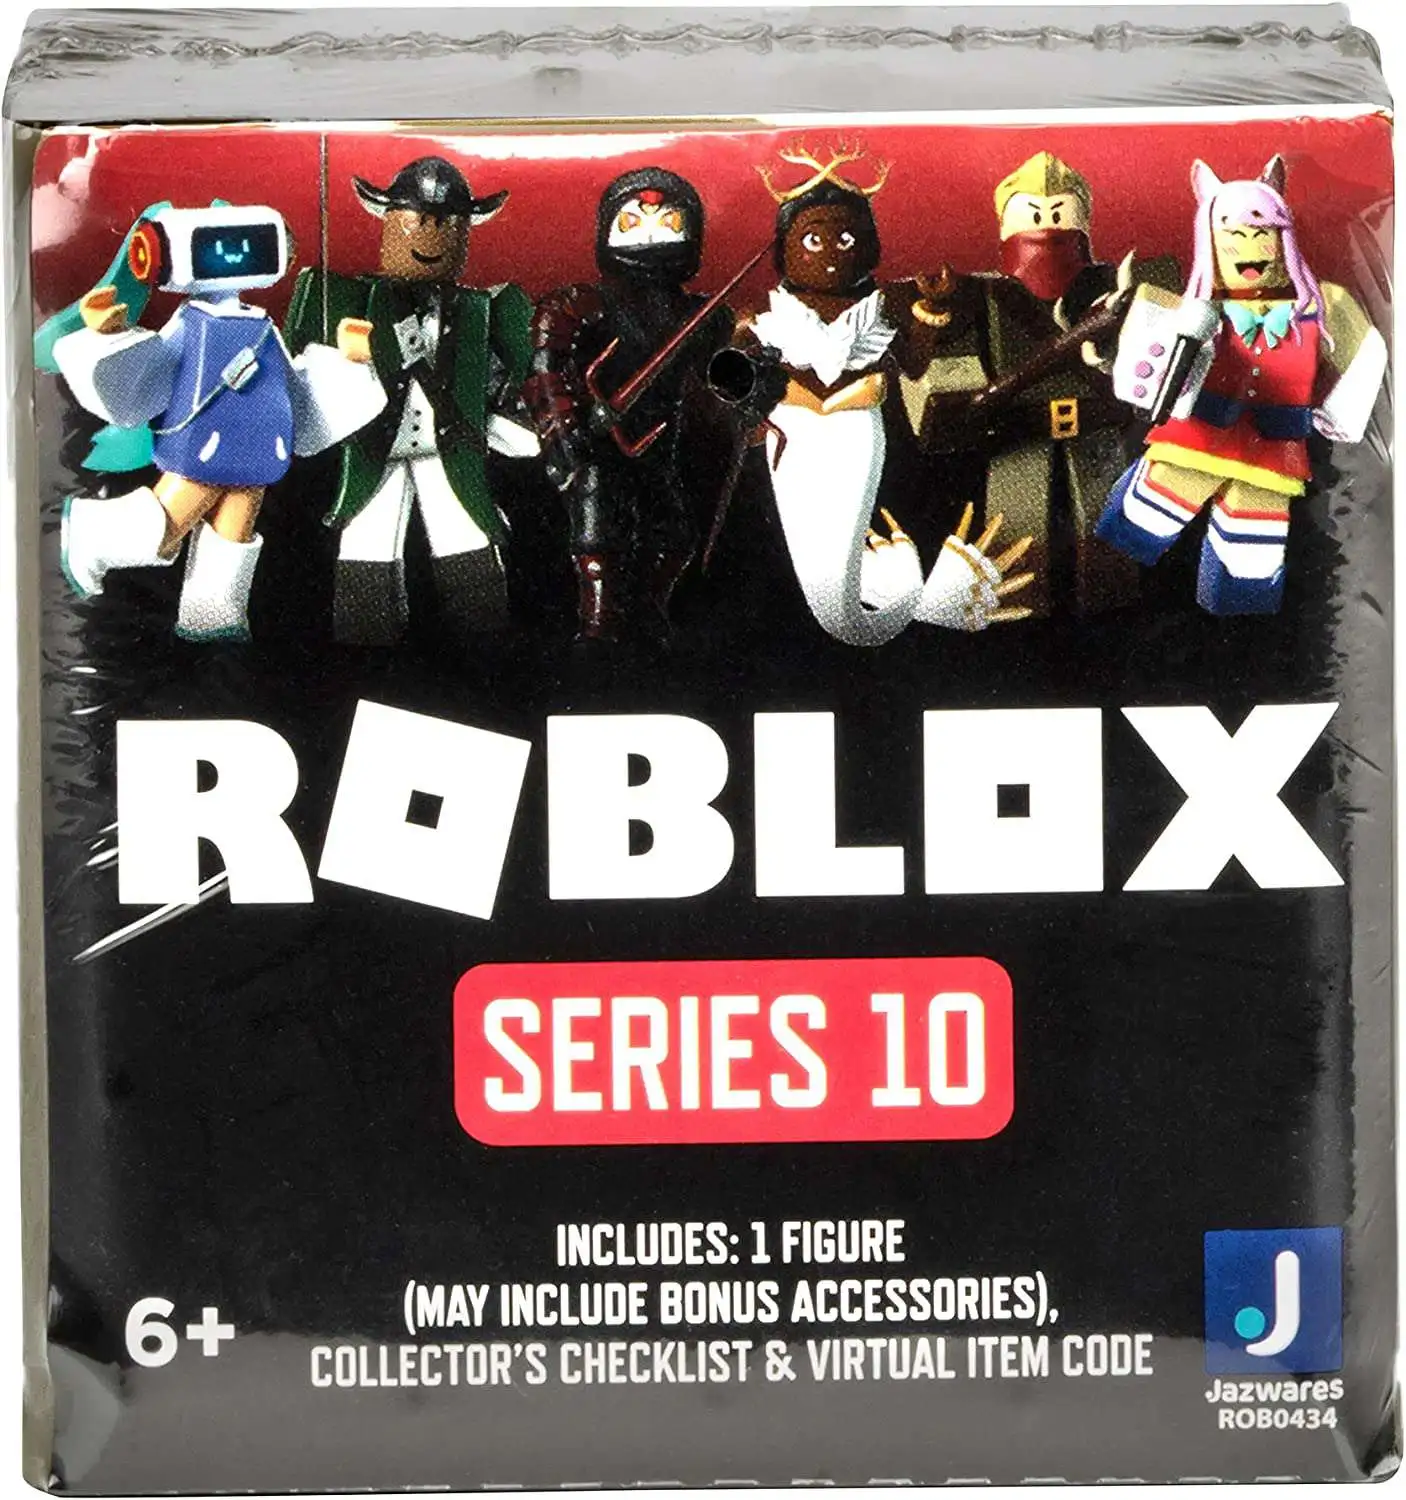 Roblox Series 5 YELLOW Gold Blind Box Toys Figures+1 2 3 4 Exclusive Game Codes 